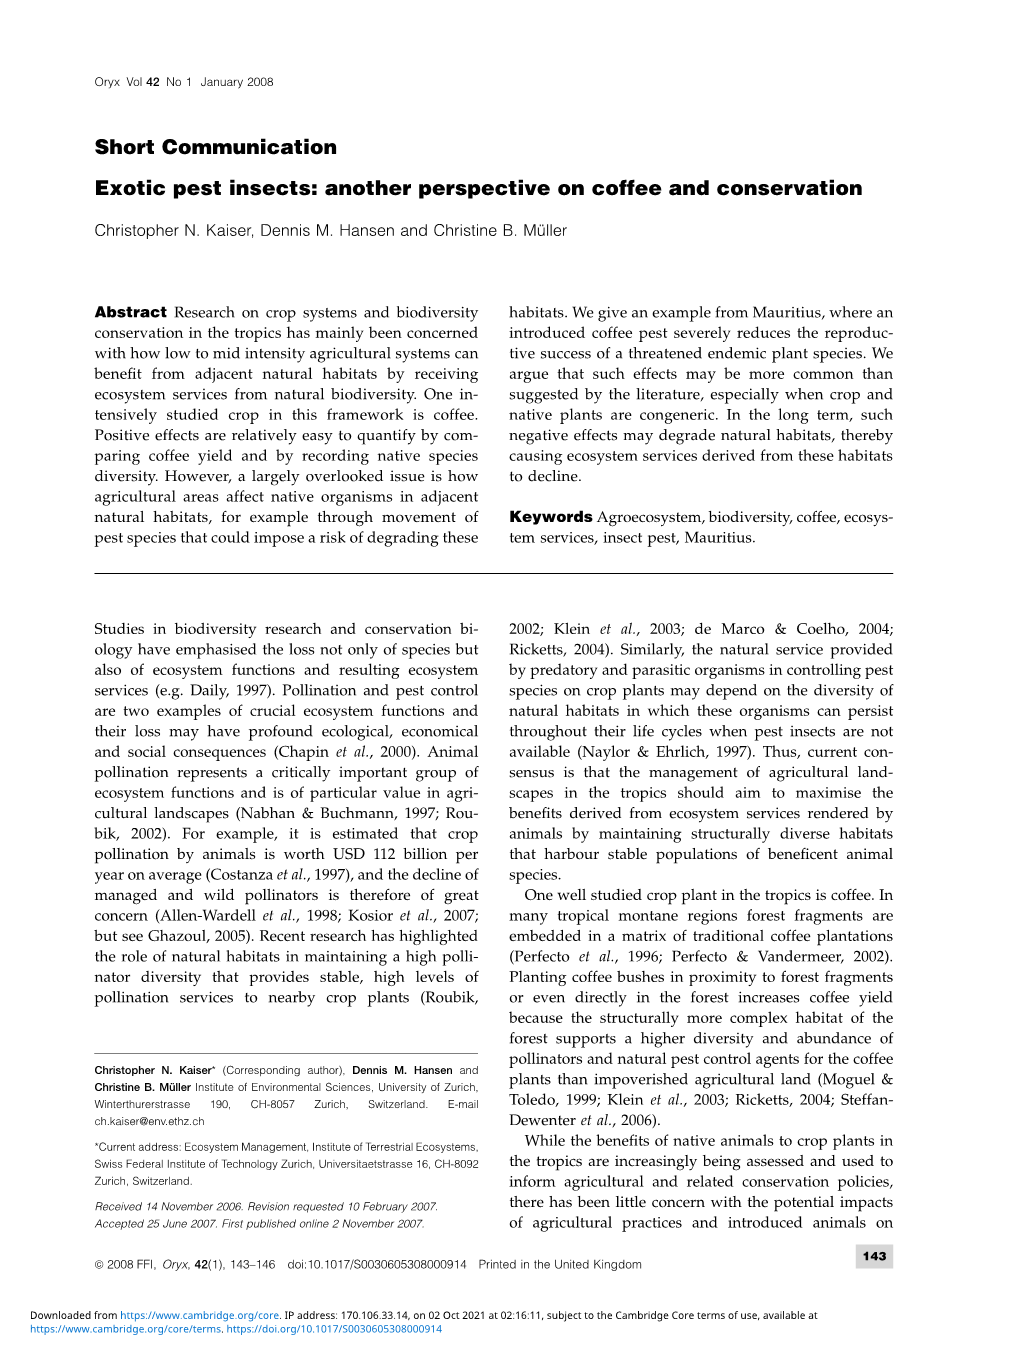 Short Communication Exotic Pest Insects: Another Perspective On